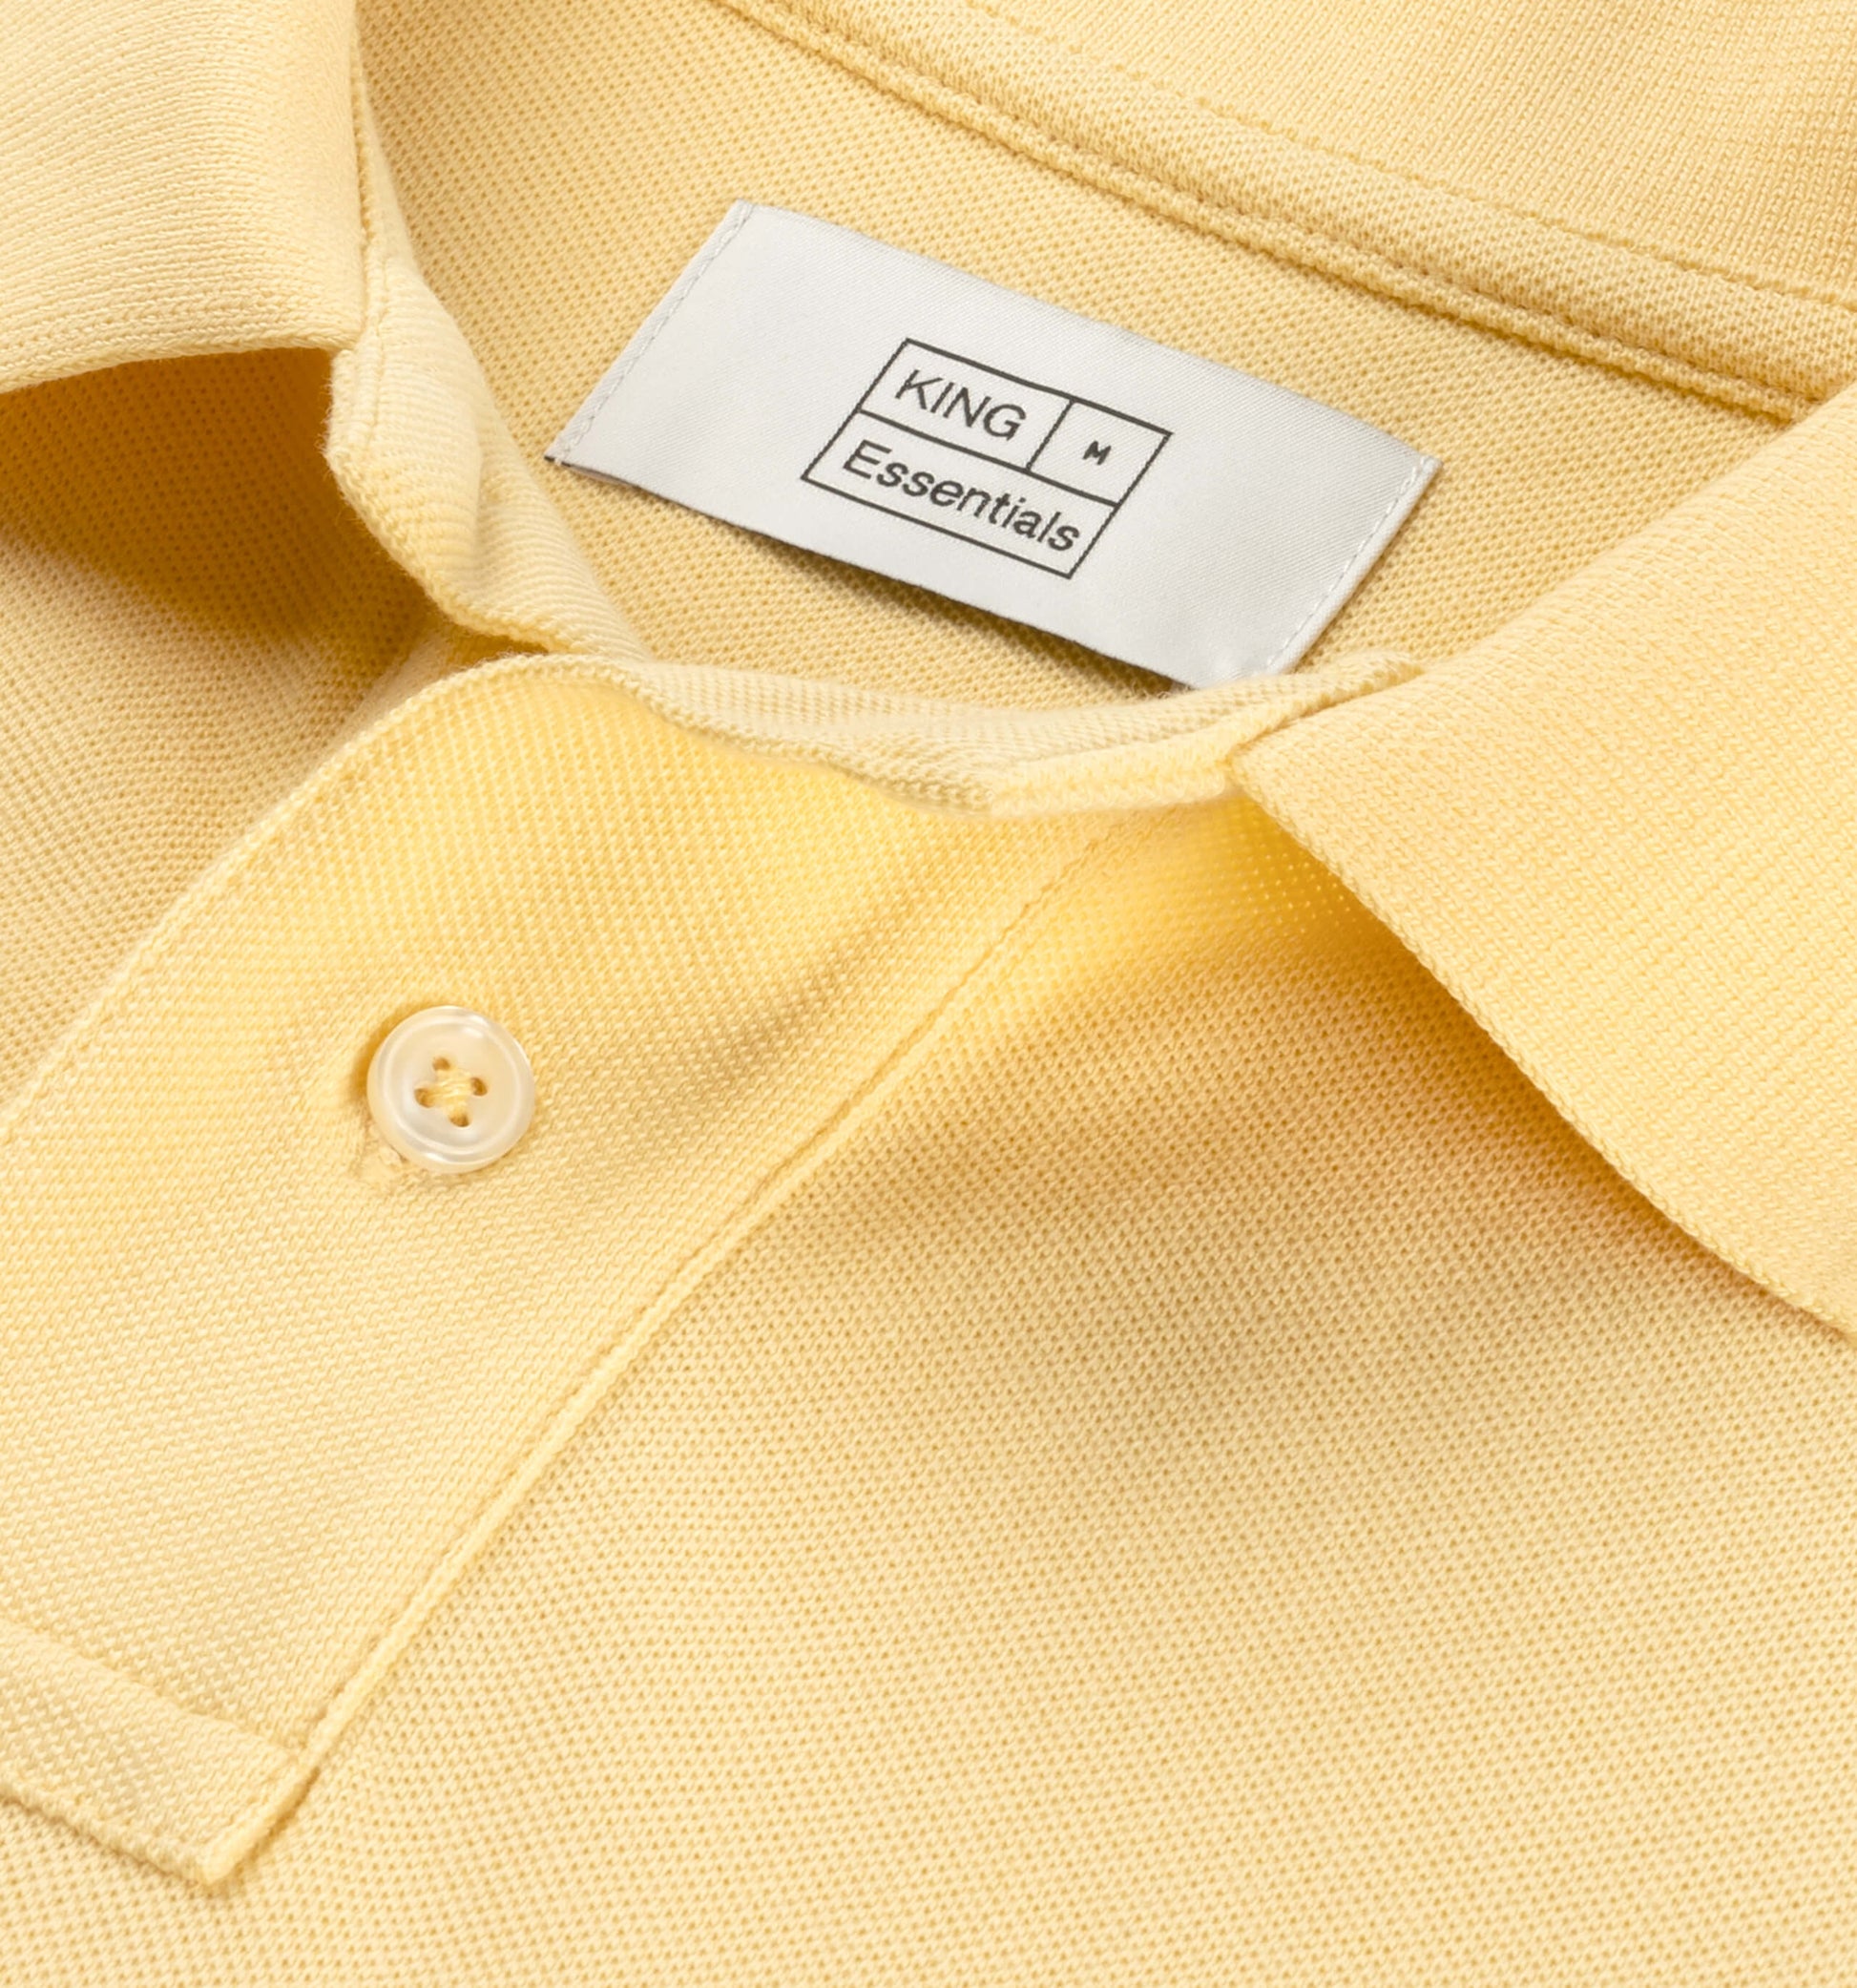 The Rene - Pique Polo In Yellow From King Essentials